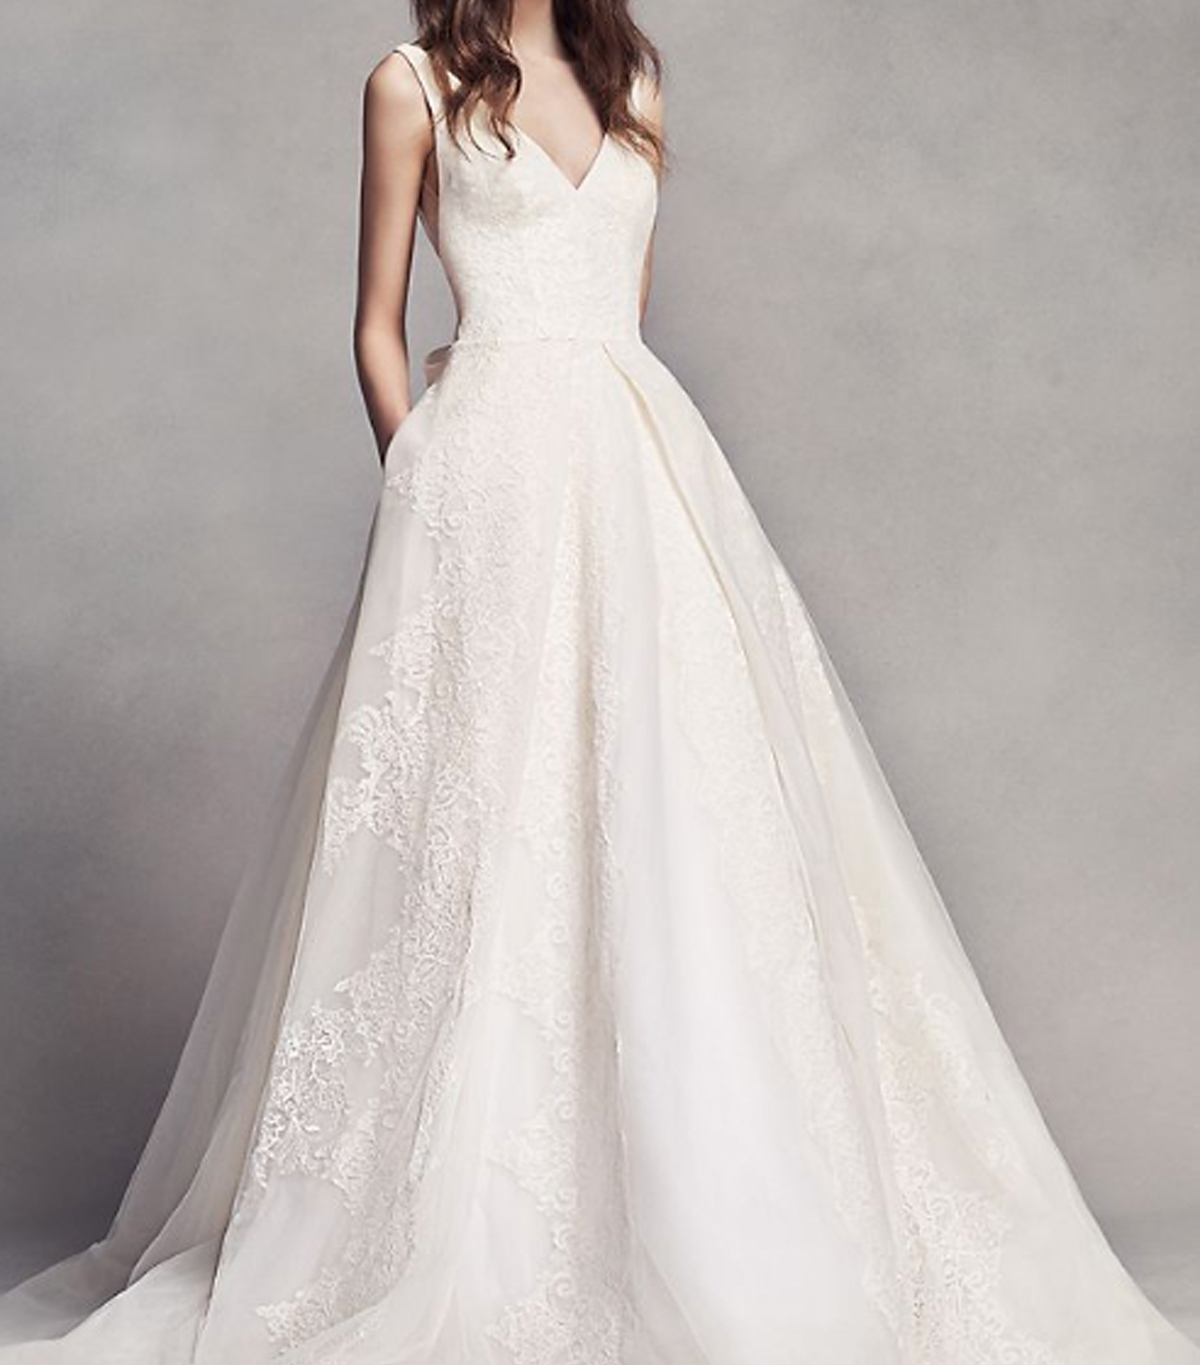 Vera Wang Bridal Gown Prices Hot Sale ...